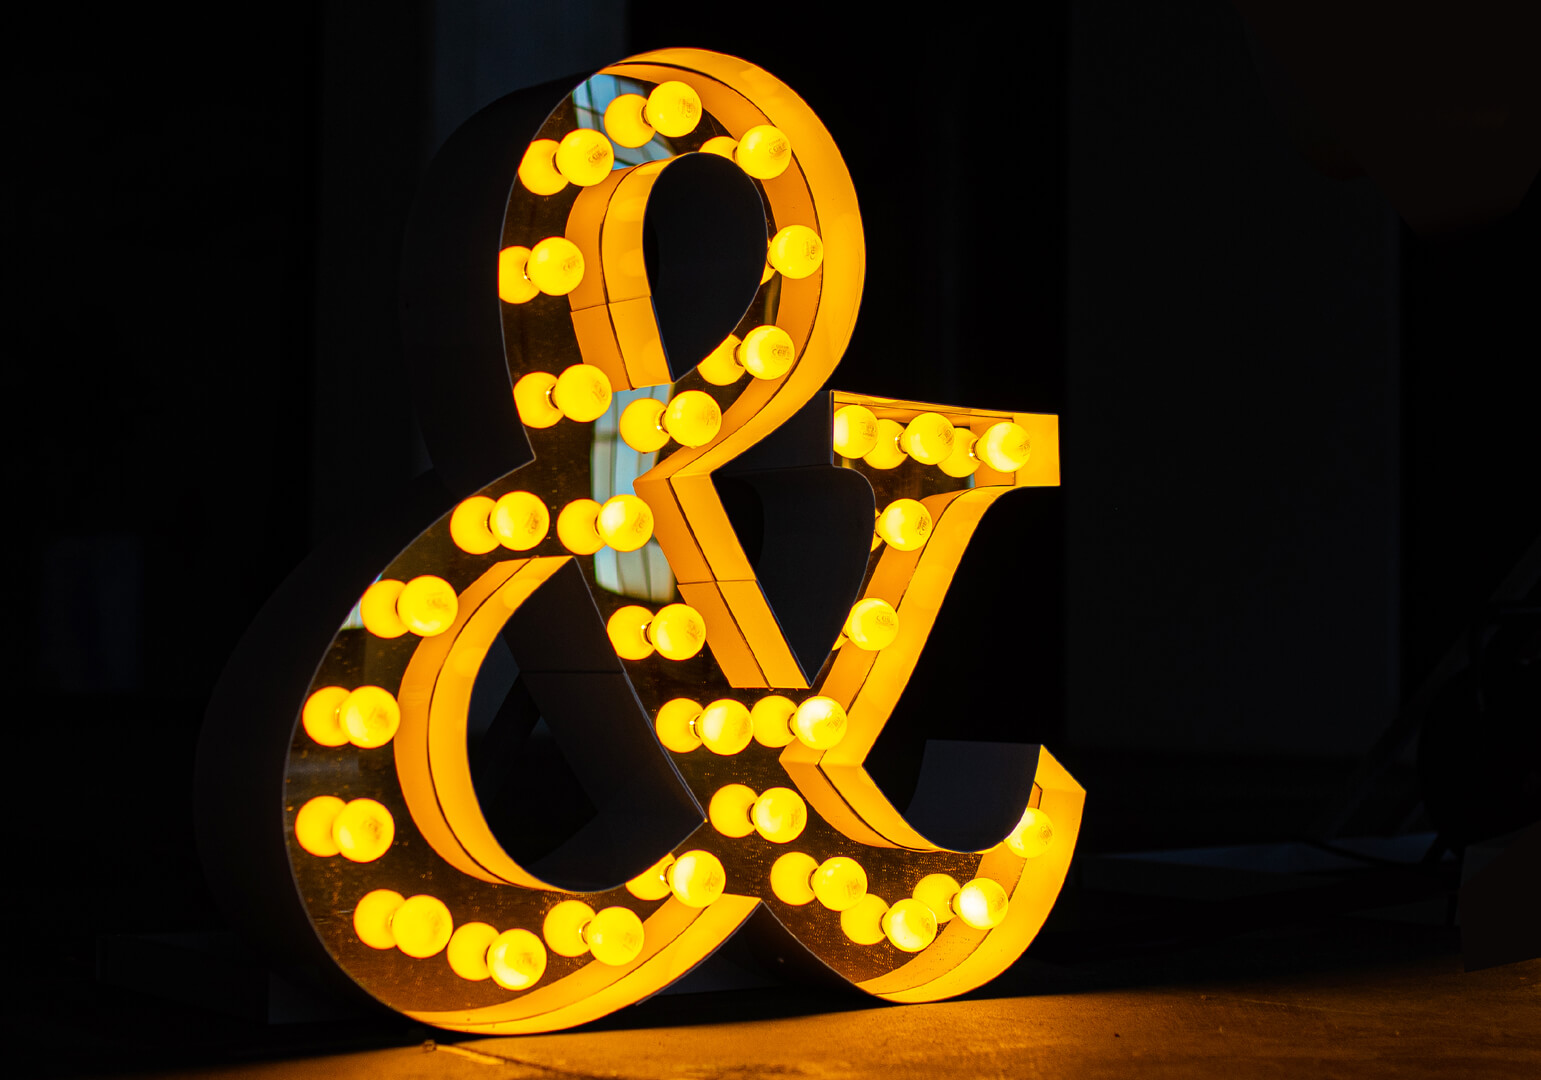 & letter with light bulbs - Lettering with light bulbs, sign &